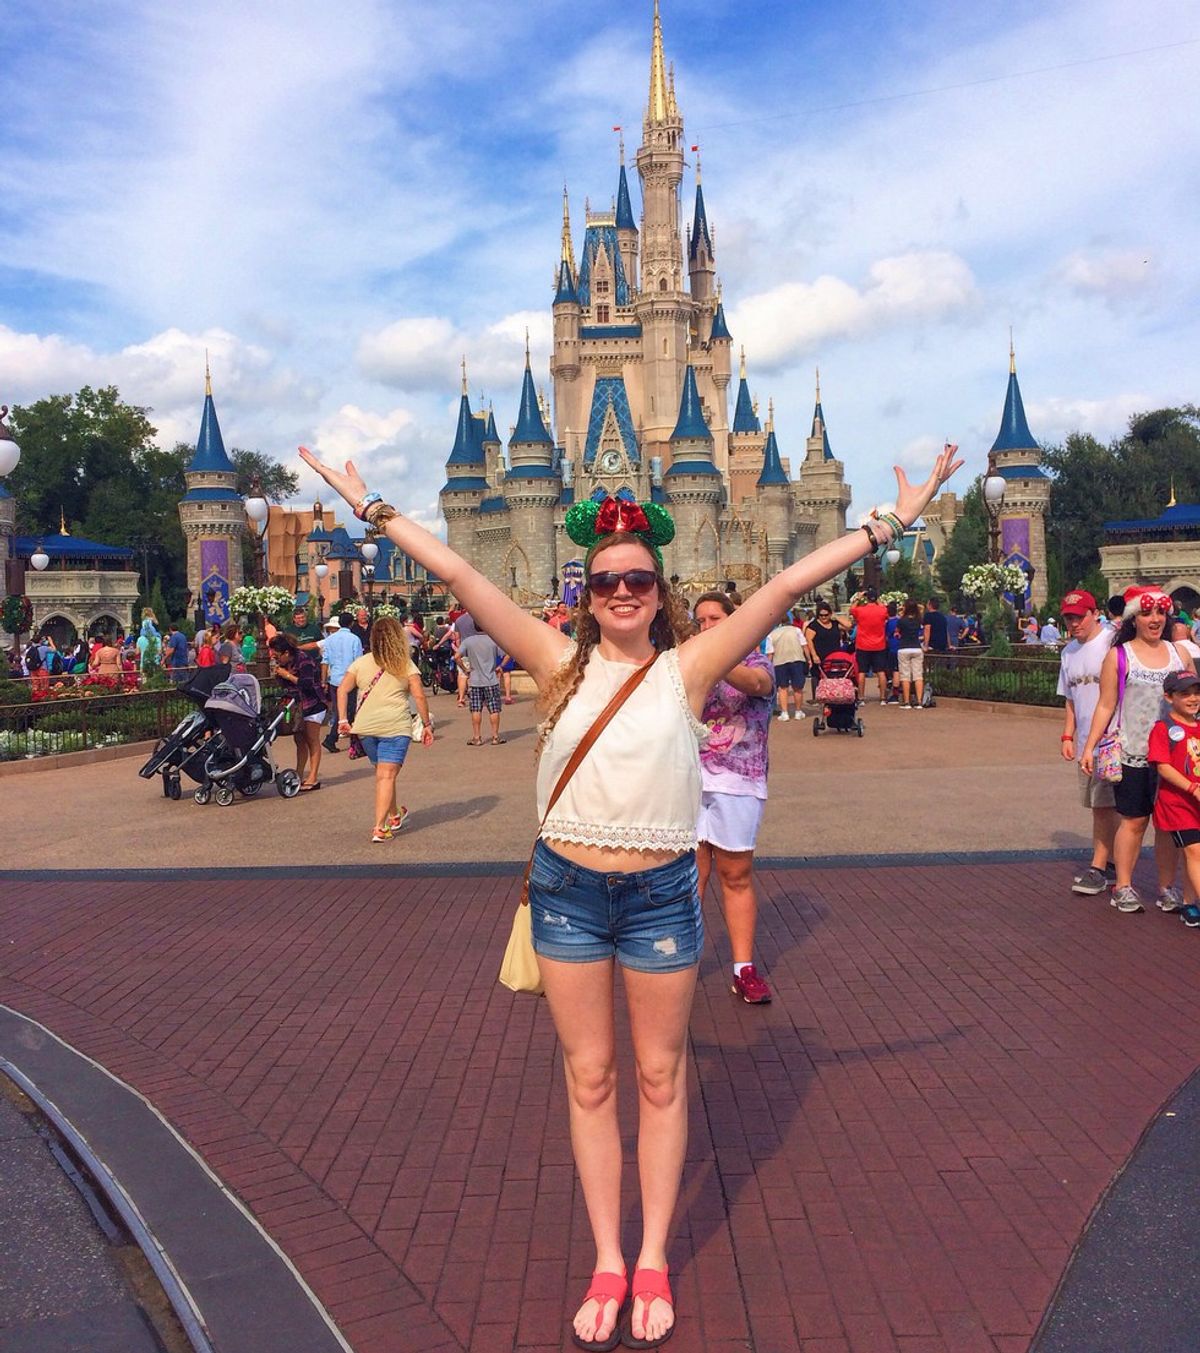 Why I Want To Do The Disney College Program